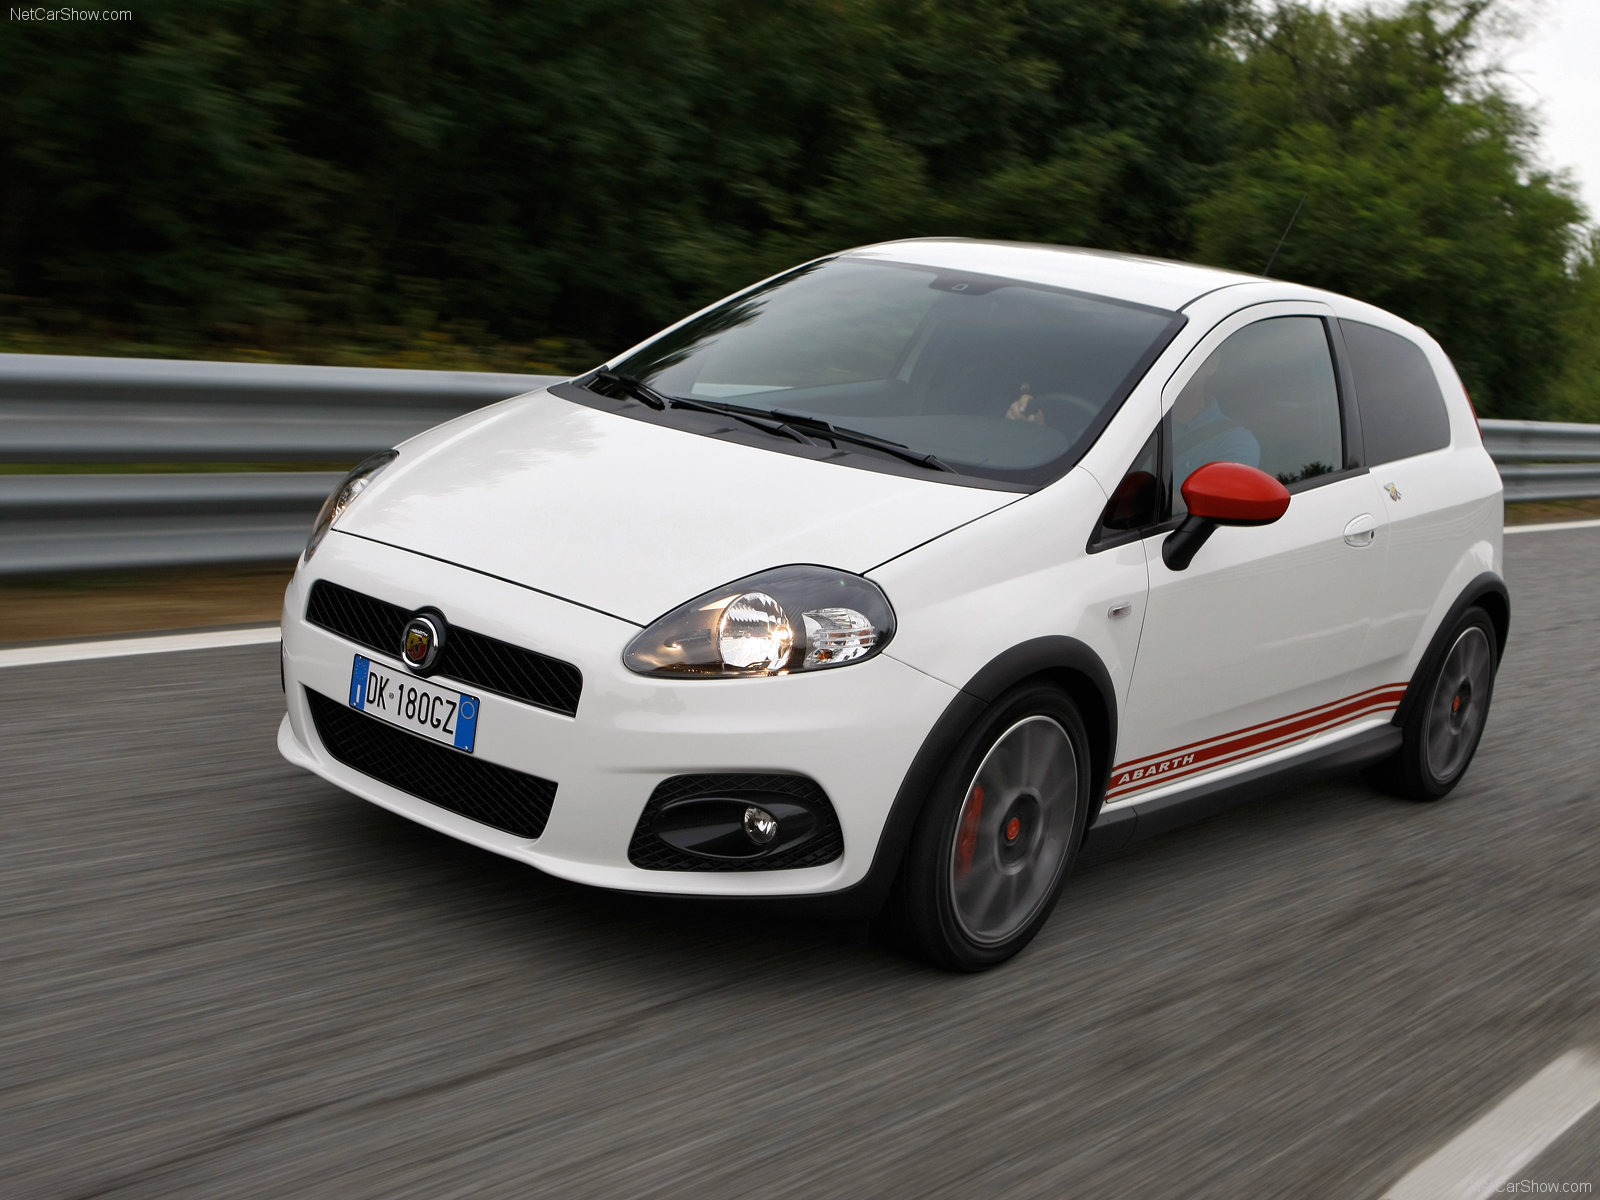 Fiat Grande Punto Abarth photos PhotoGallery with 31